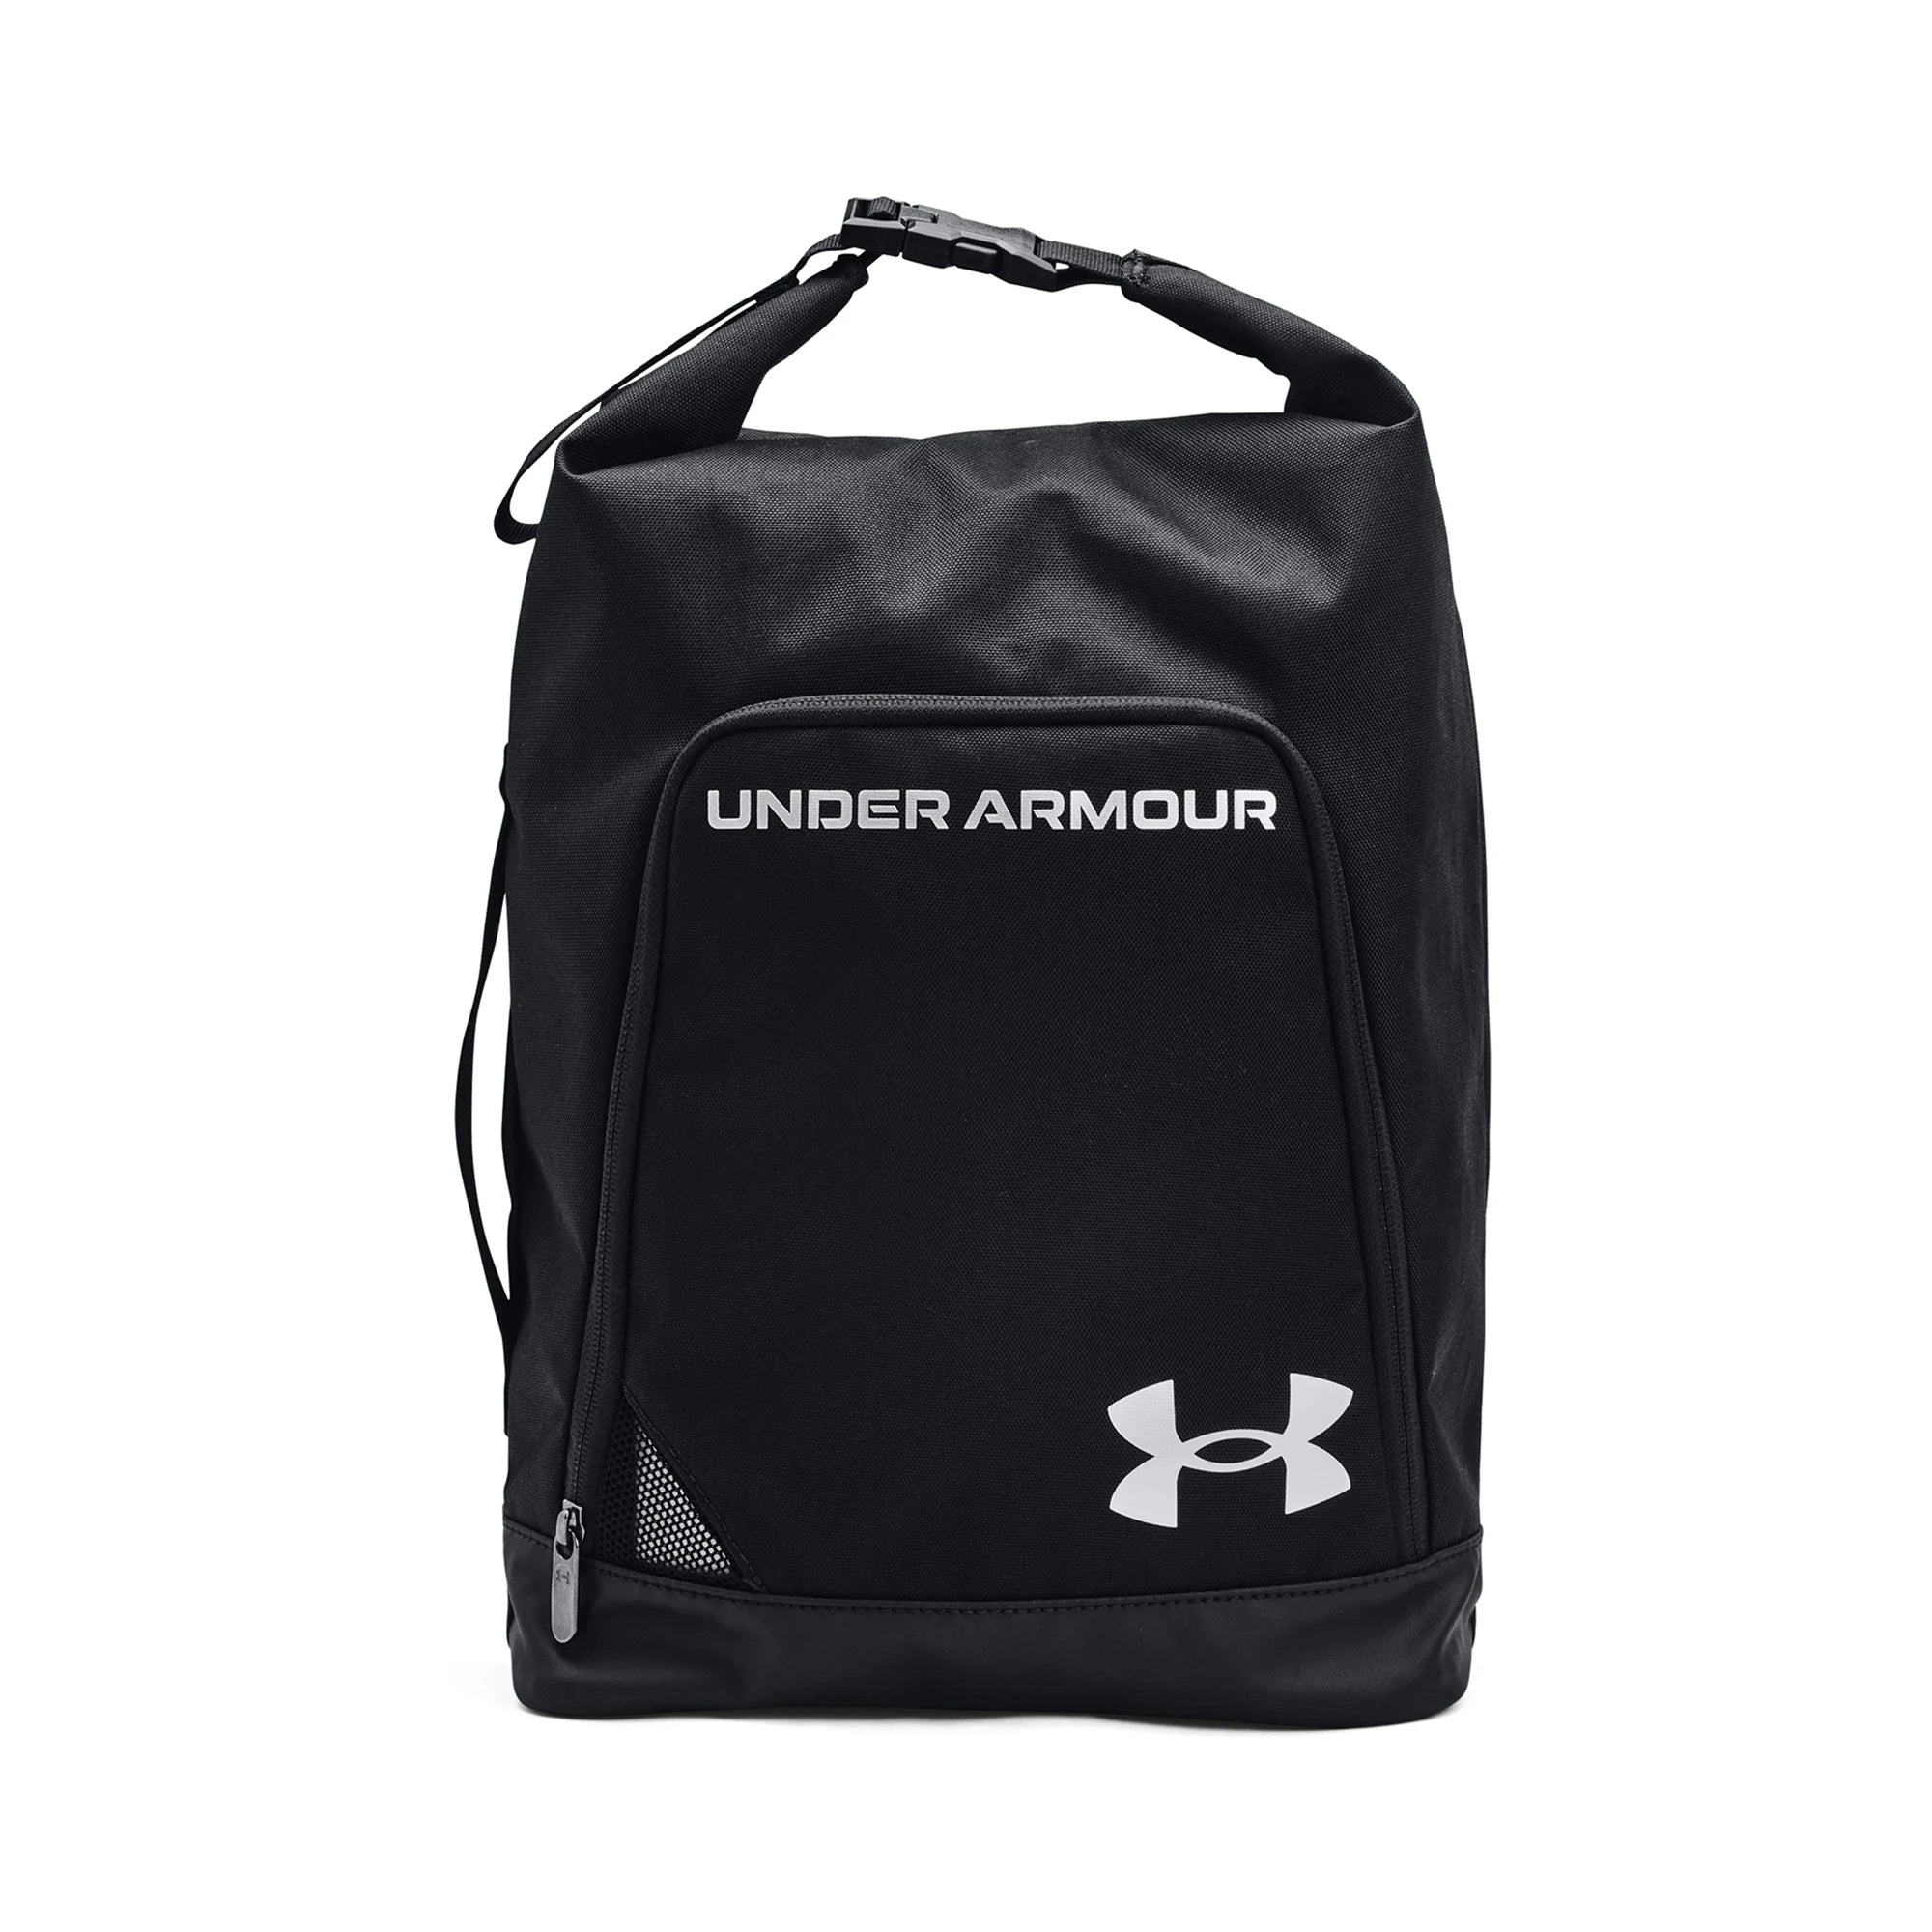 UNDER ARMOUR DELUXE GOLF SHOE BAG